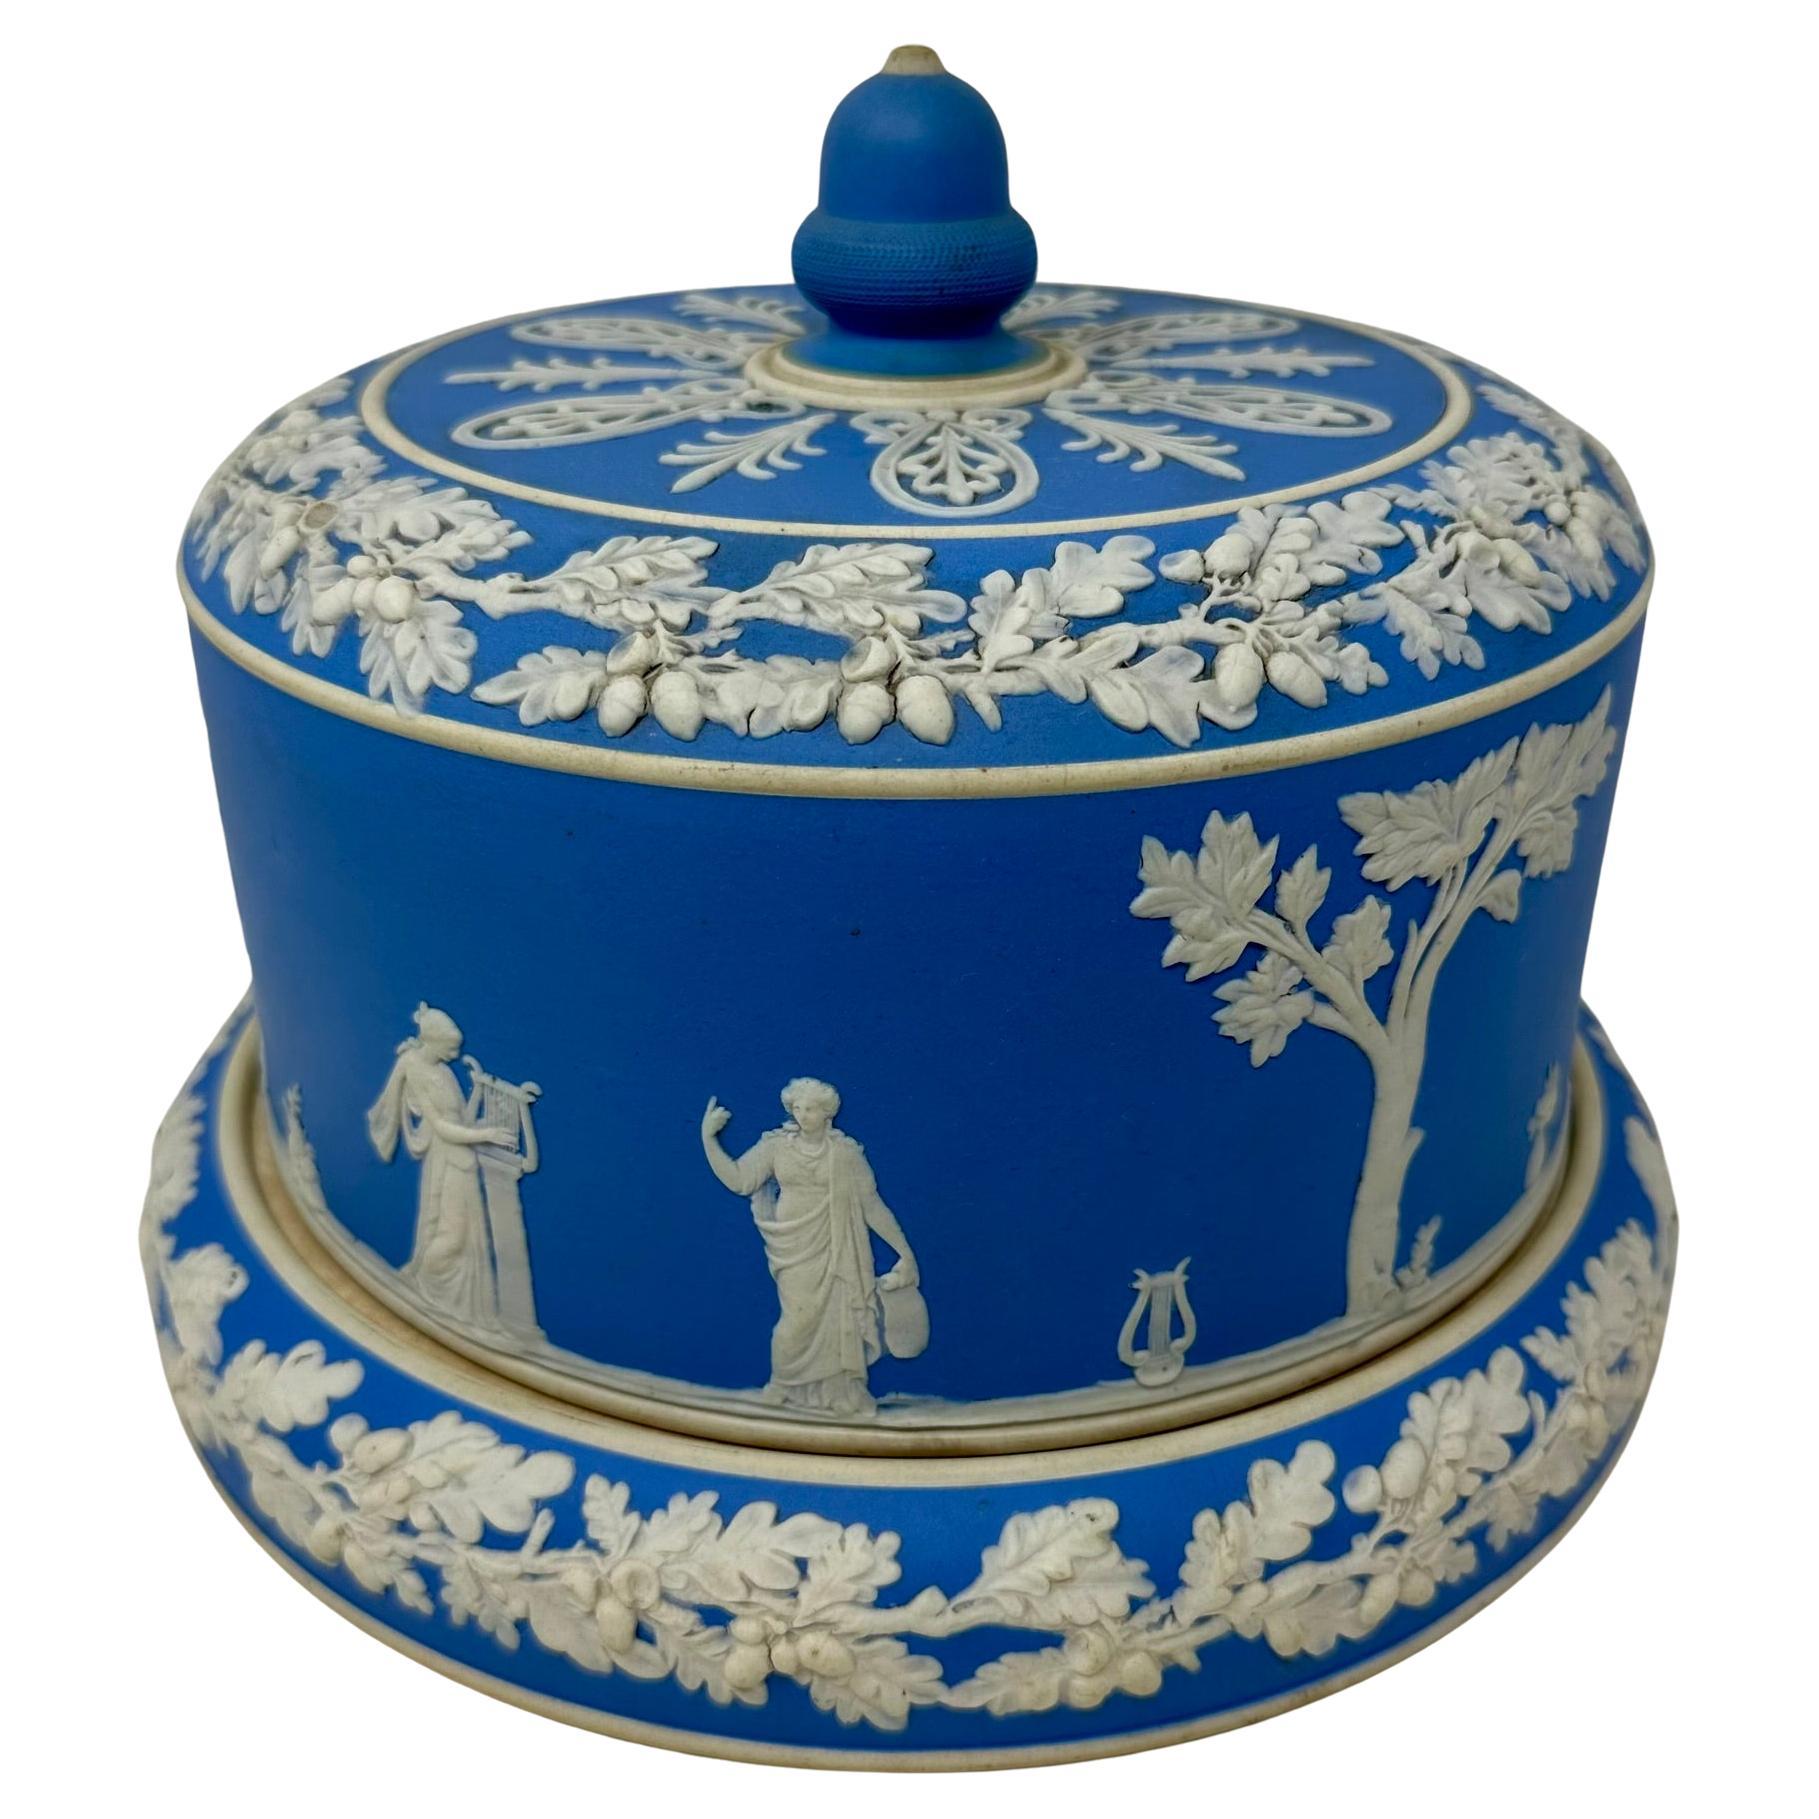 Antique English Wedgwood Jasperware Porcelain Cheese Dome and Cover, Circa 1890-1910.